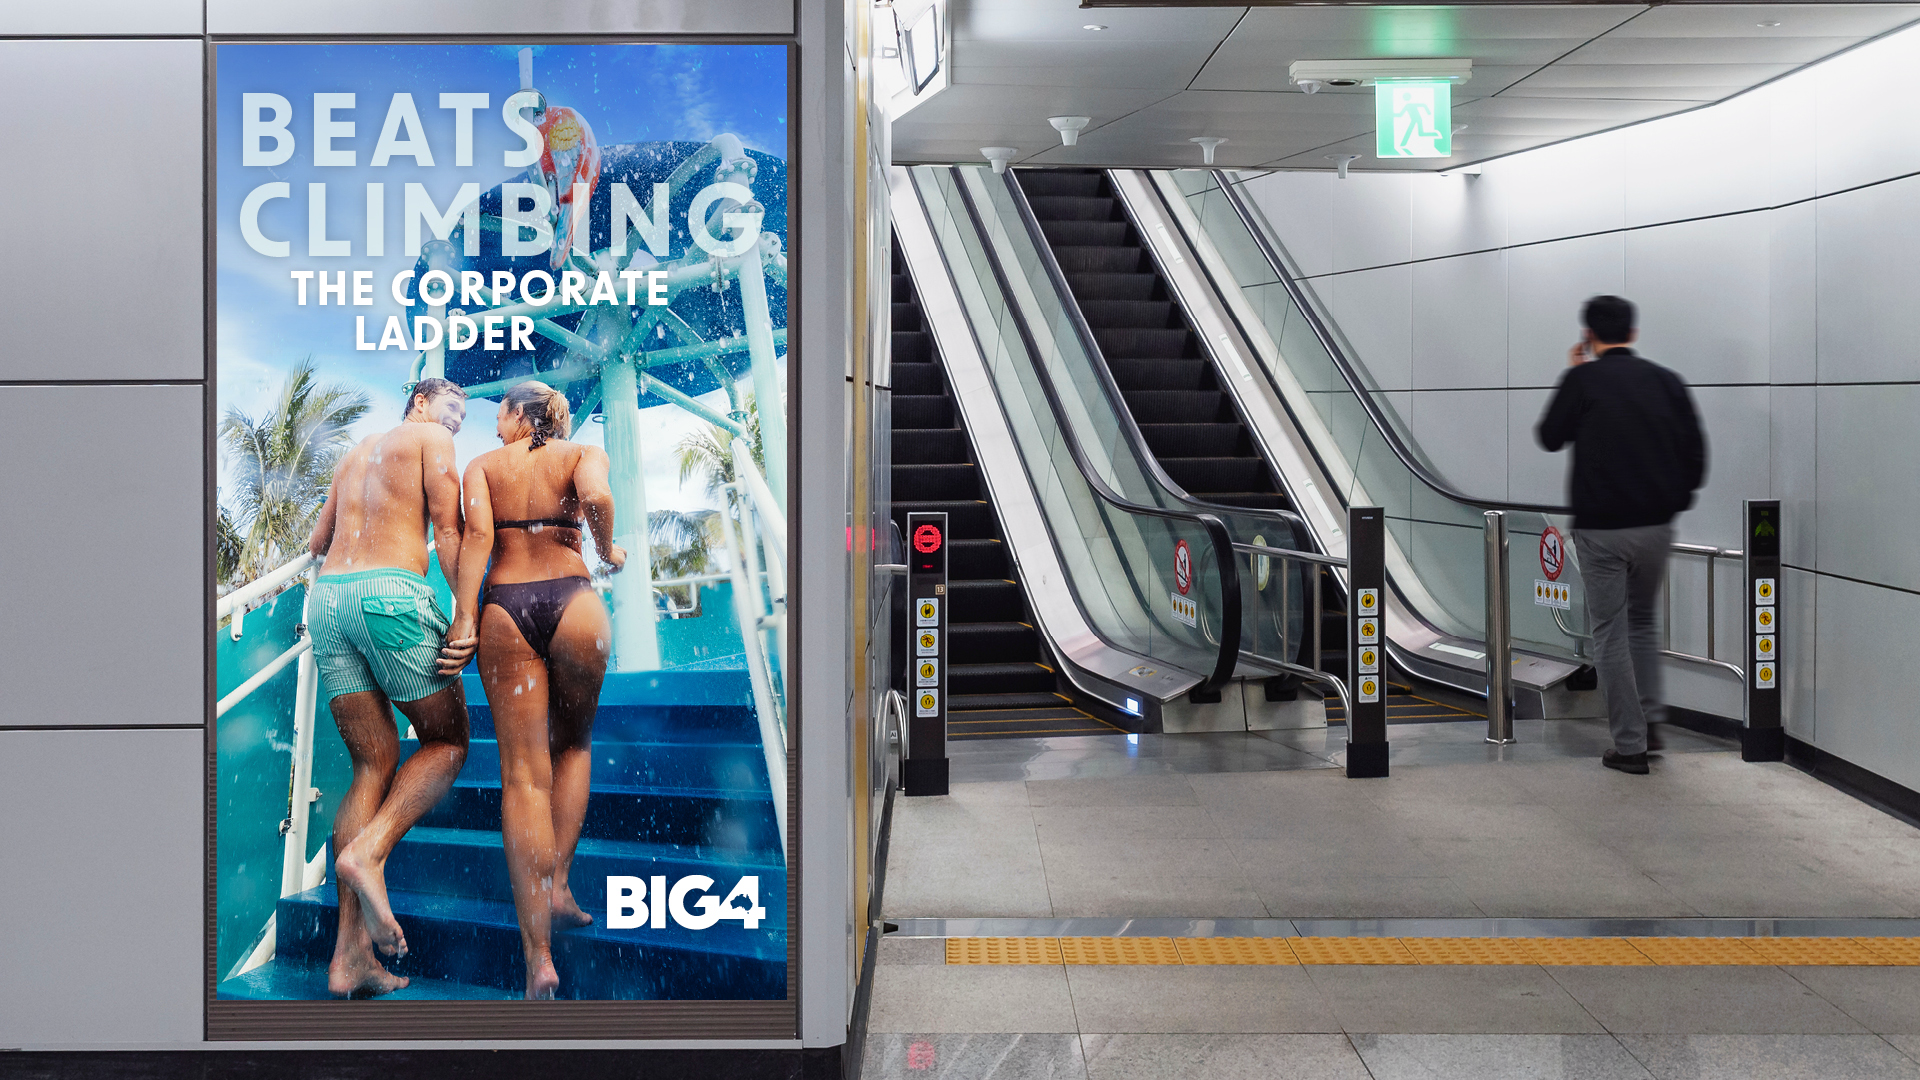 Poster at airport terminal depicting young couple in swimming costumes ascending stairs at a pool/water park, with the tagline 'Beats Climbing the Corporate Ladder'. Part of Big 4's 'Experience More' campaign by Bellwether Agency, 2022